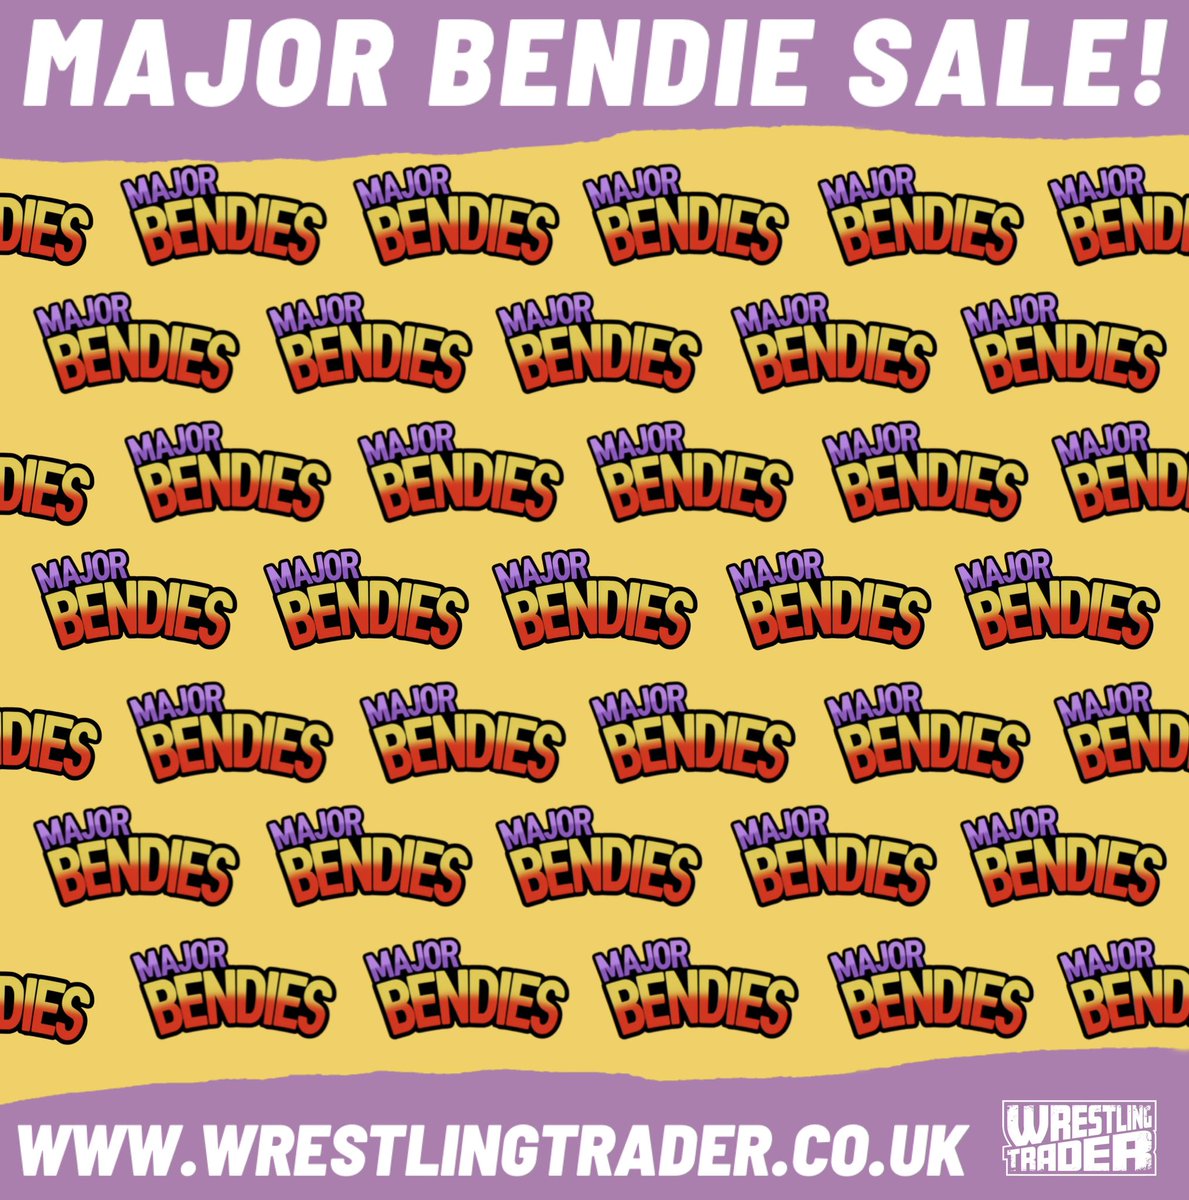 🛍️SALE SALE SALE🛍️ All Major Bendies are in the sale! Grab a bargain at ➡️ wrestlingtrader.co.uk/collections/mw…